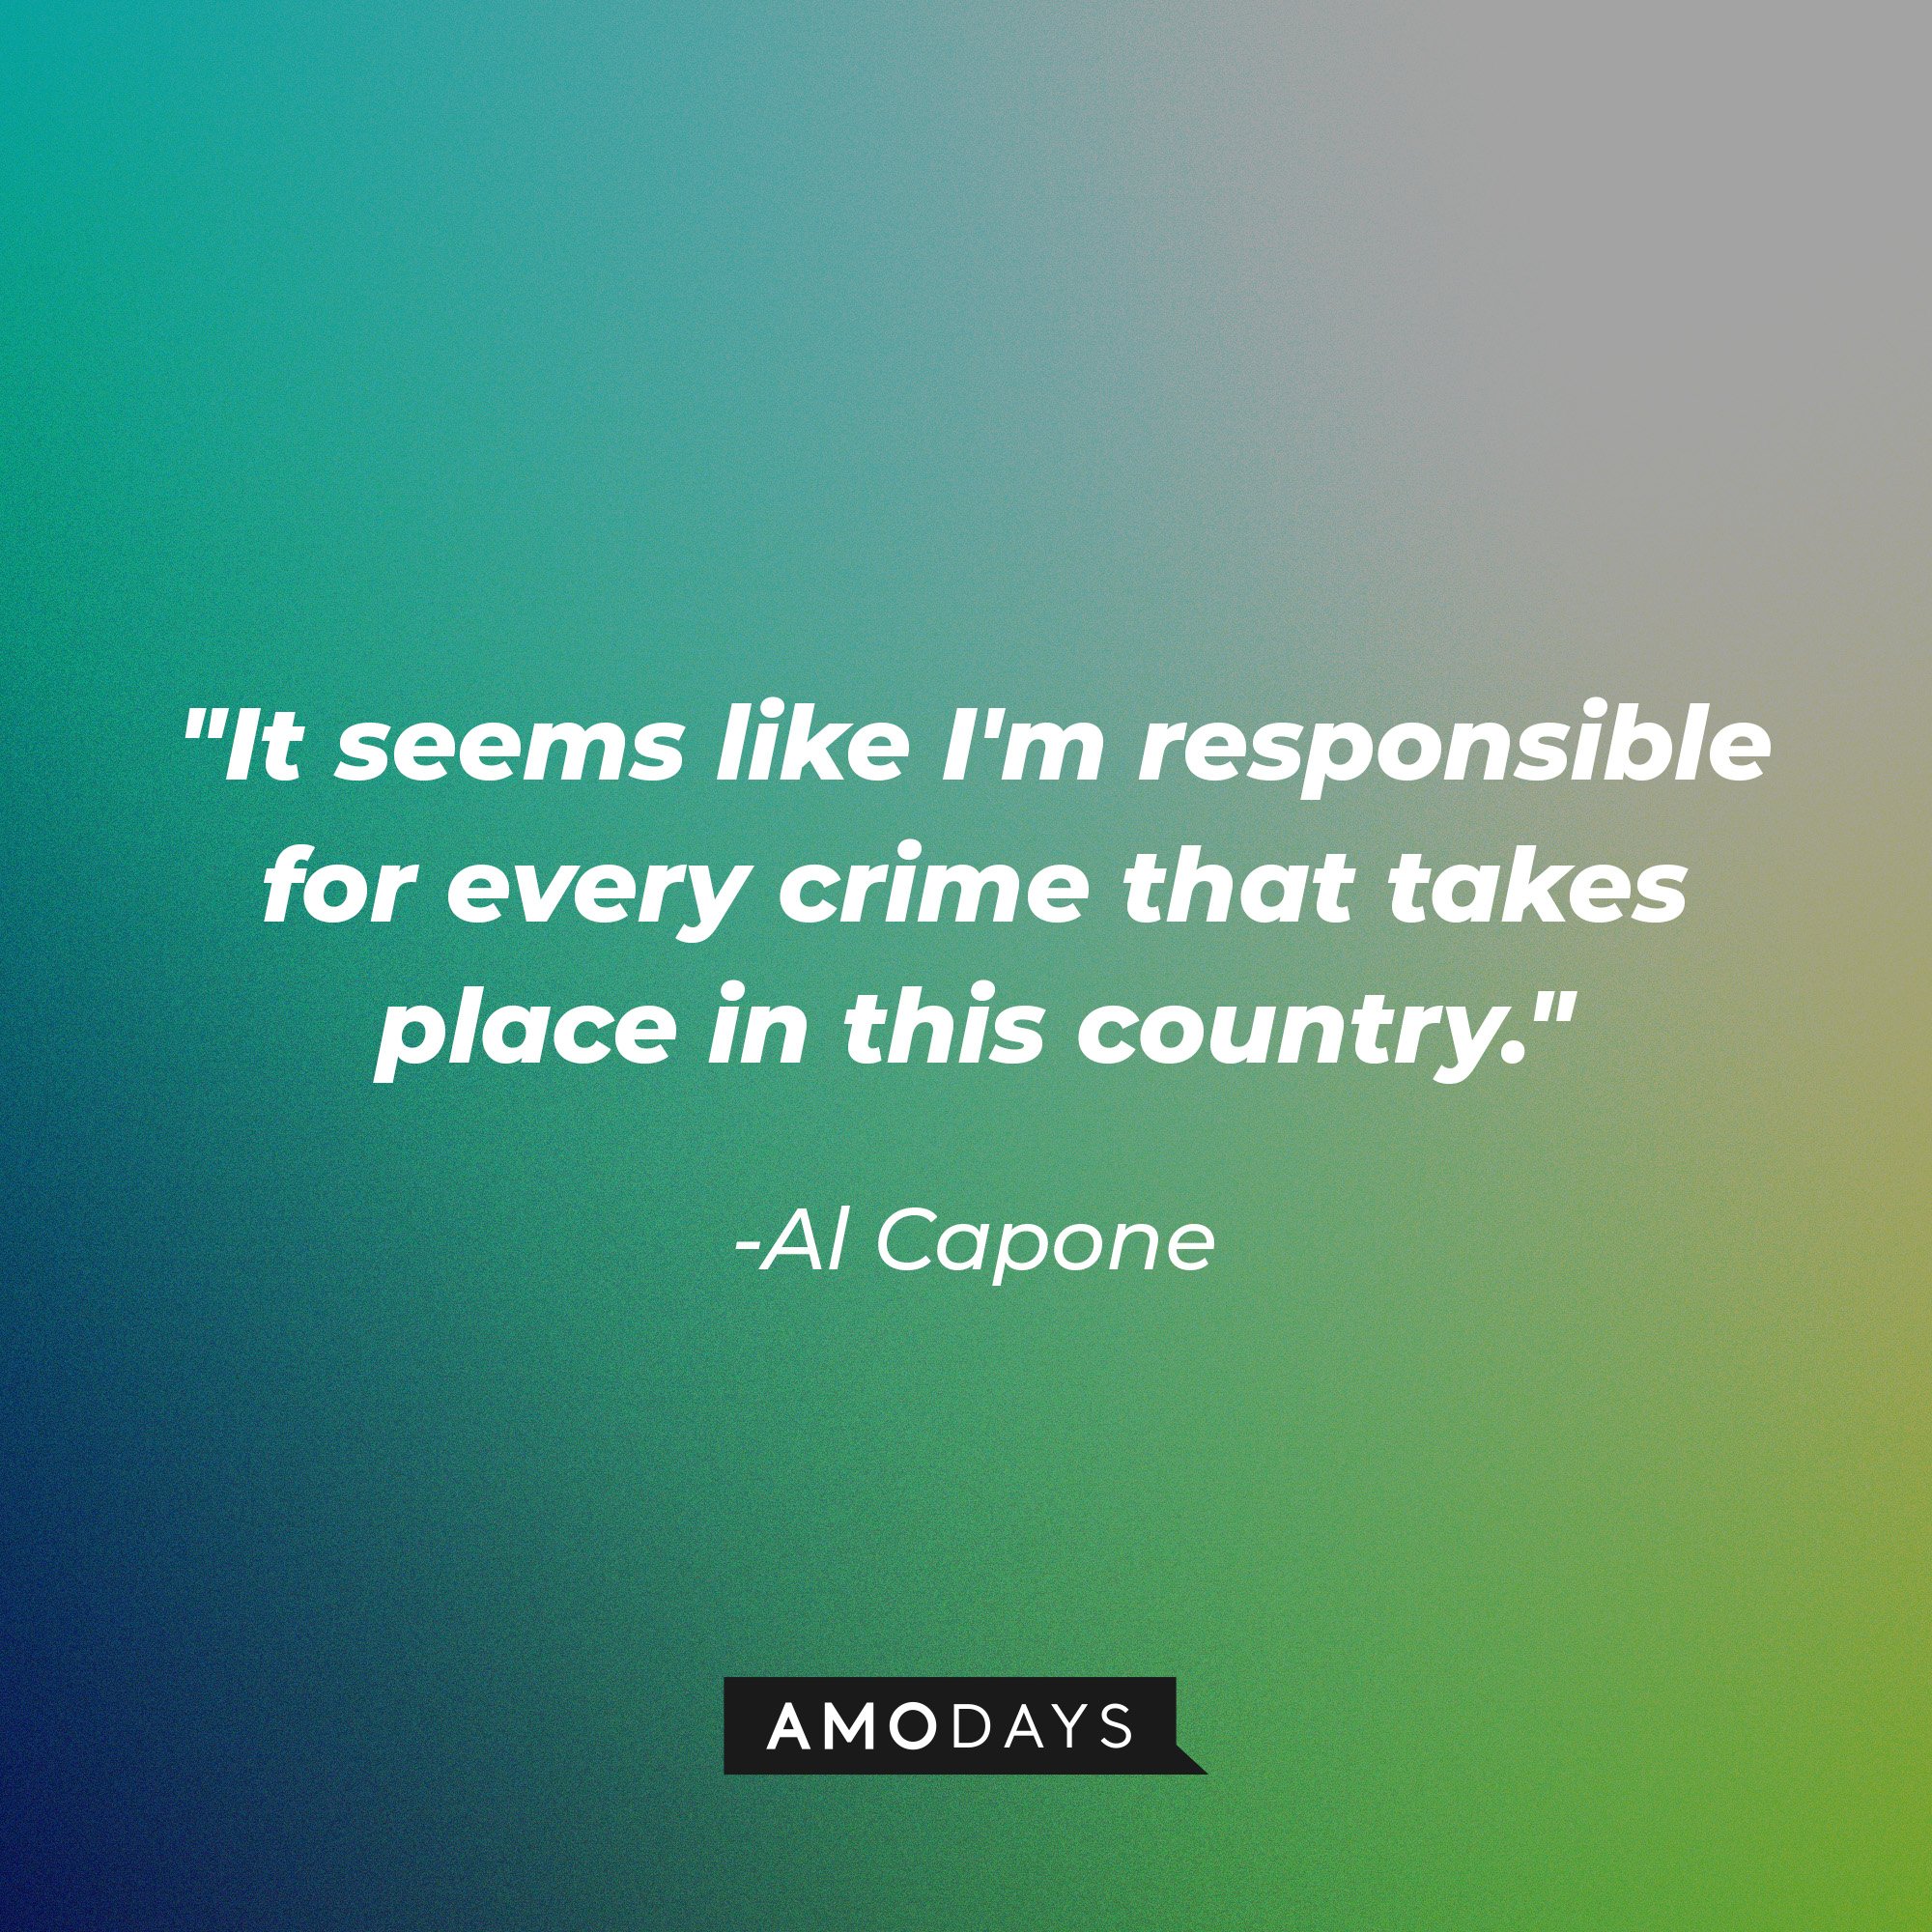 Al Capone’s quote: "It seems like I'm responsible for every crime that takes place in this country." | Image: AmoDays